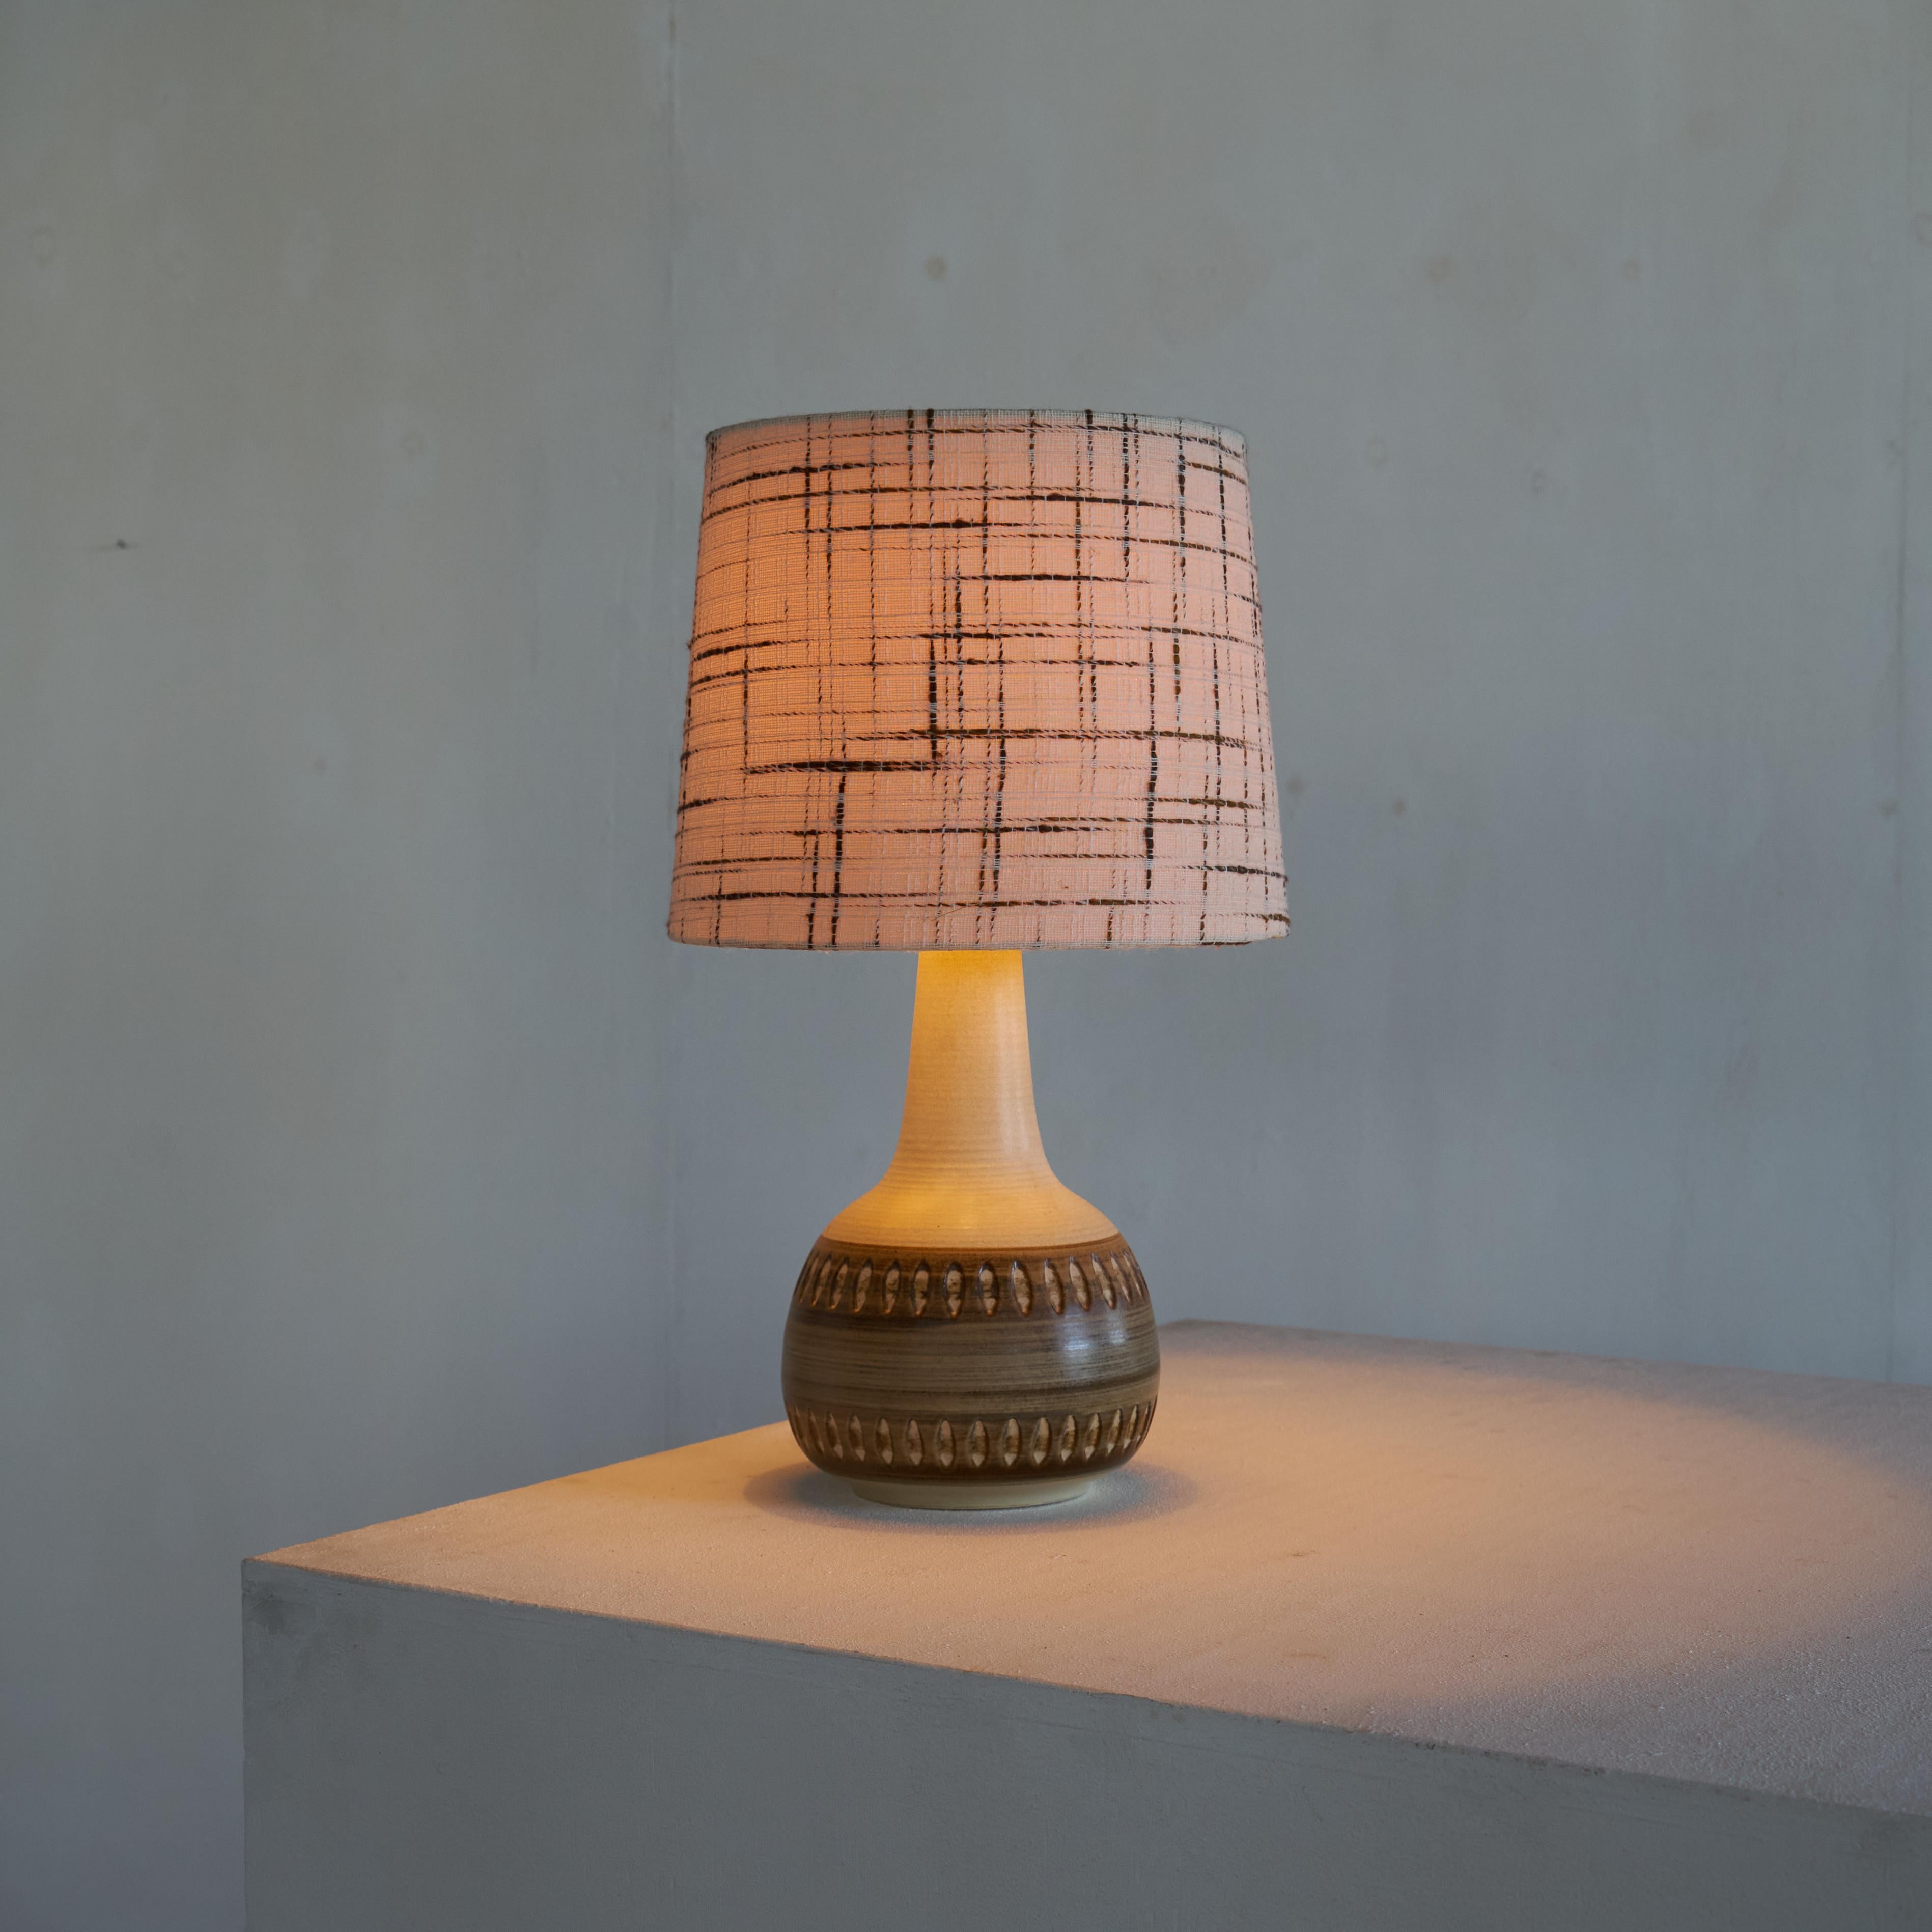 Søholm Stentøj Studio Pottery Table Lamp with Original Shade, Denmark, 1960s.

Beautiful mid-century studio pottery table lamp by the renowned maker Søholm from Denmark, made in the 1960s. Quintessentially mid-century, this table lamp with its